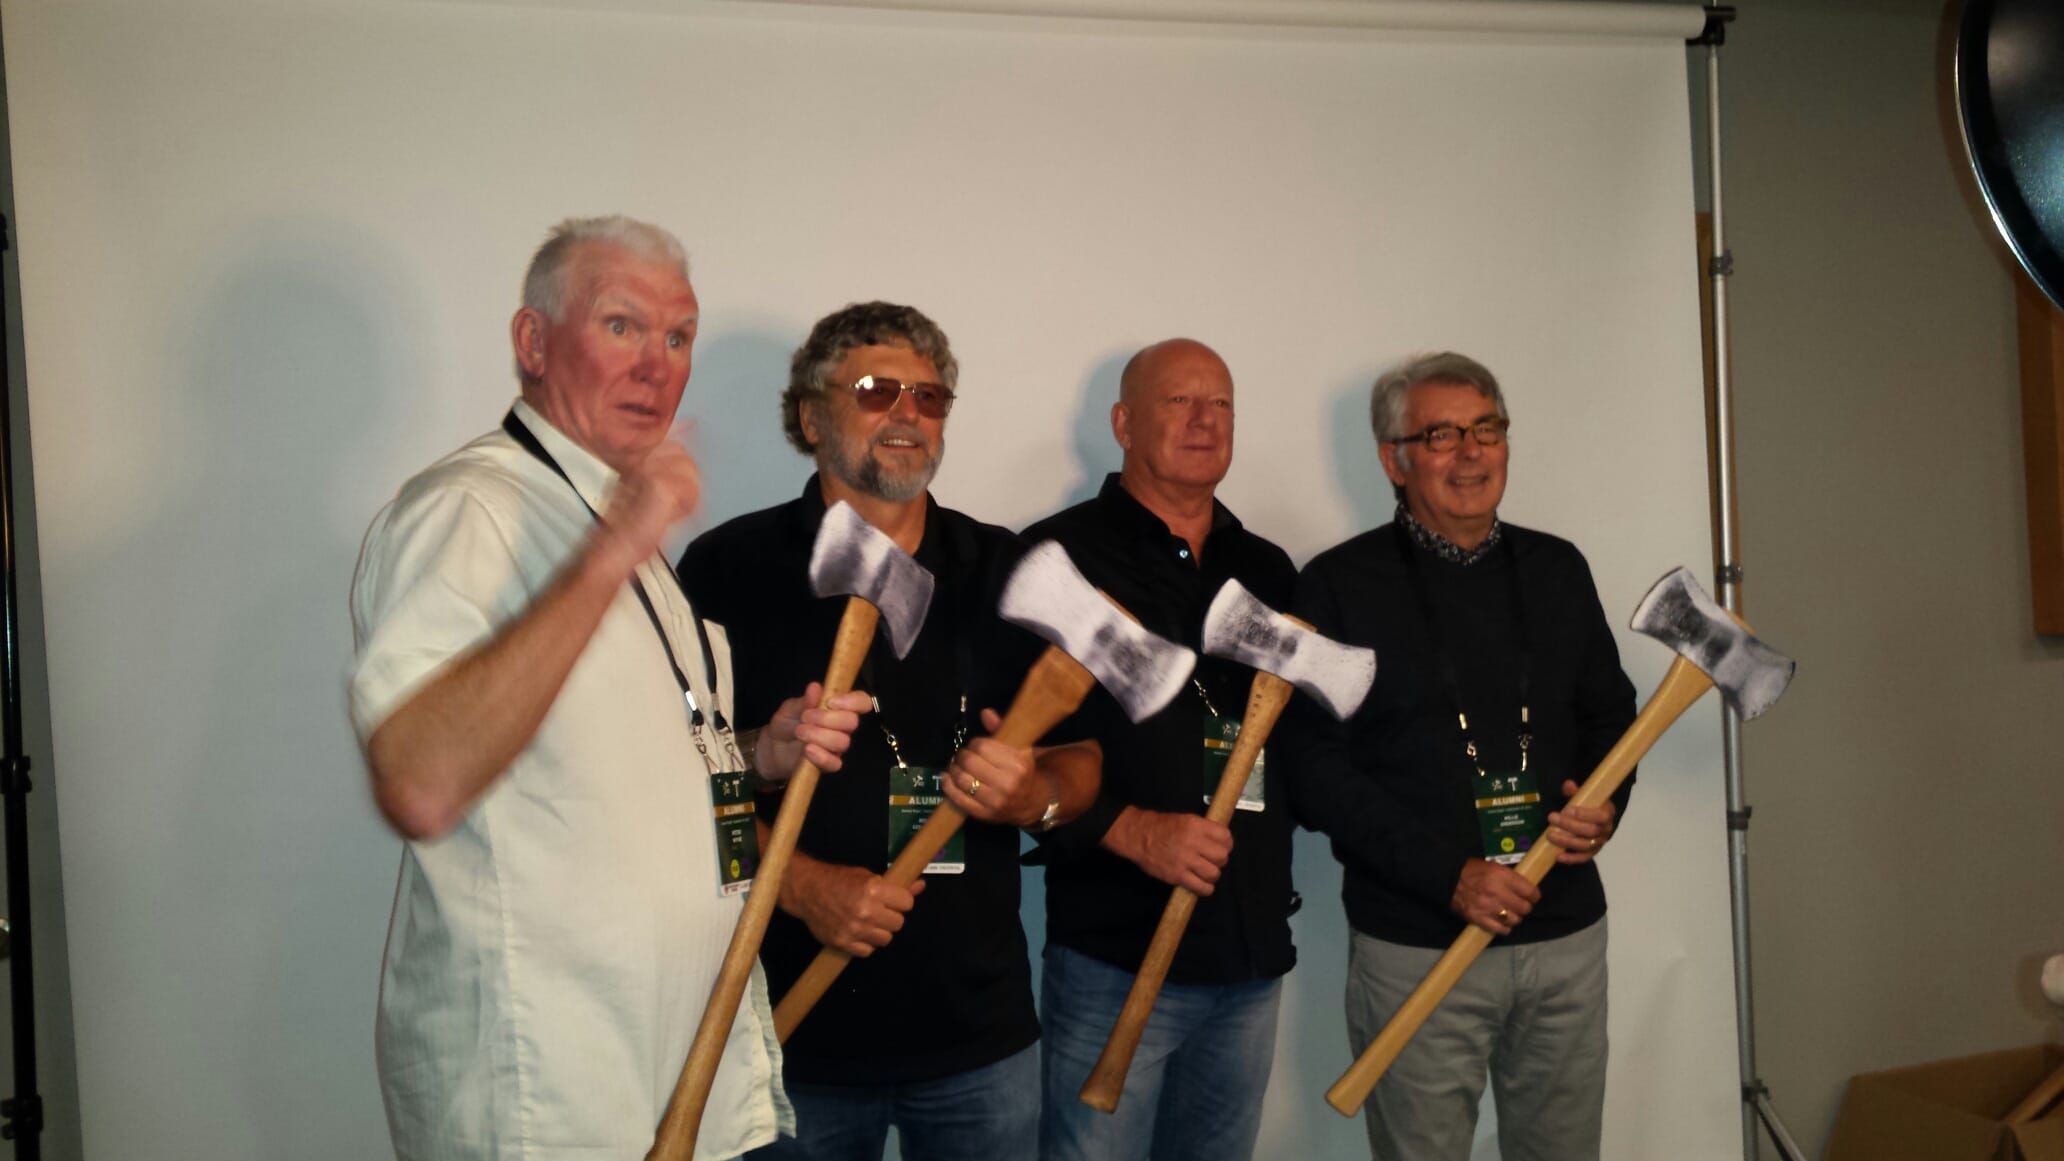 Left to right: Peter Withe, Roger Goldingay, Tony Betts and Willie Anderson played for the 1975 Portland Timbers. The expansion North American Soccer League team advanced to the league championship match, losing to the Tampa Bay Rowdies.